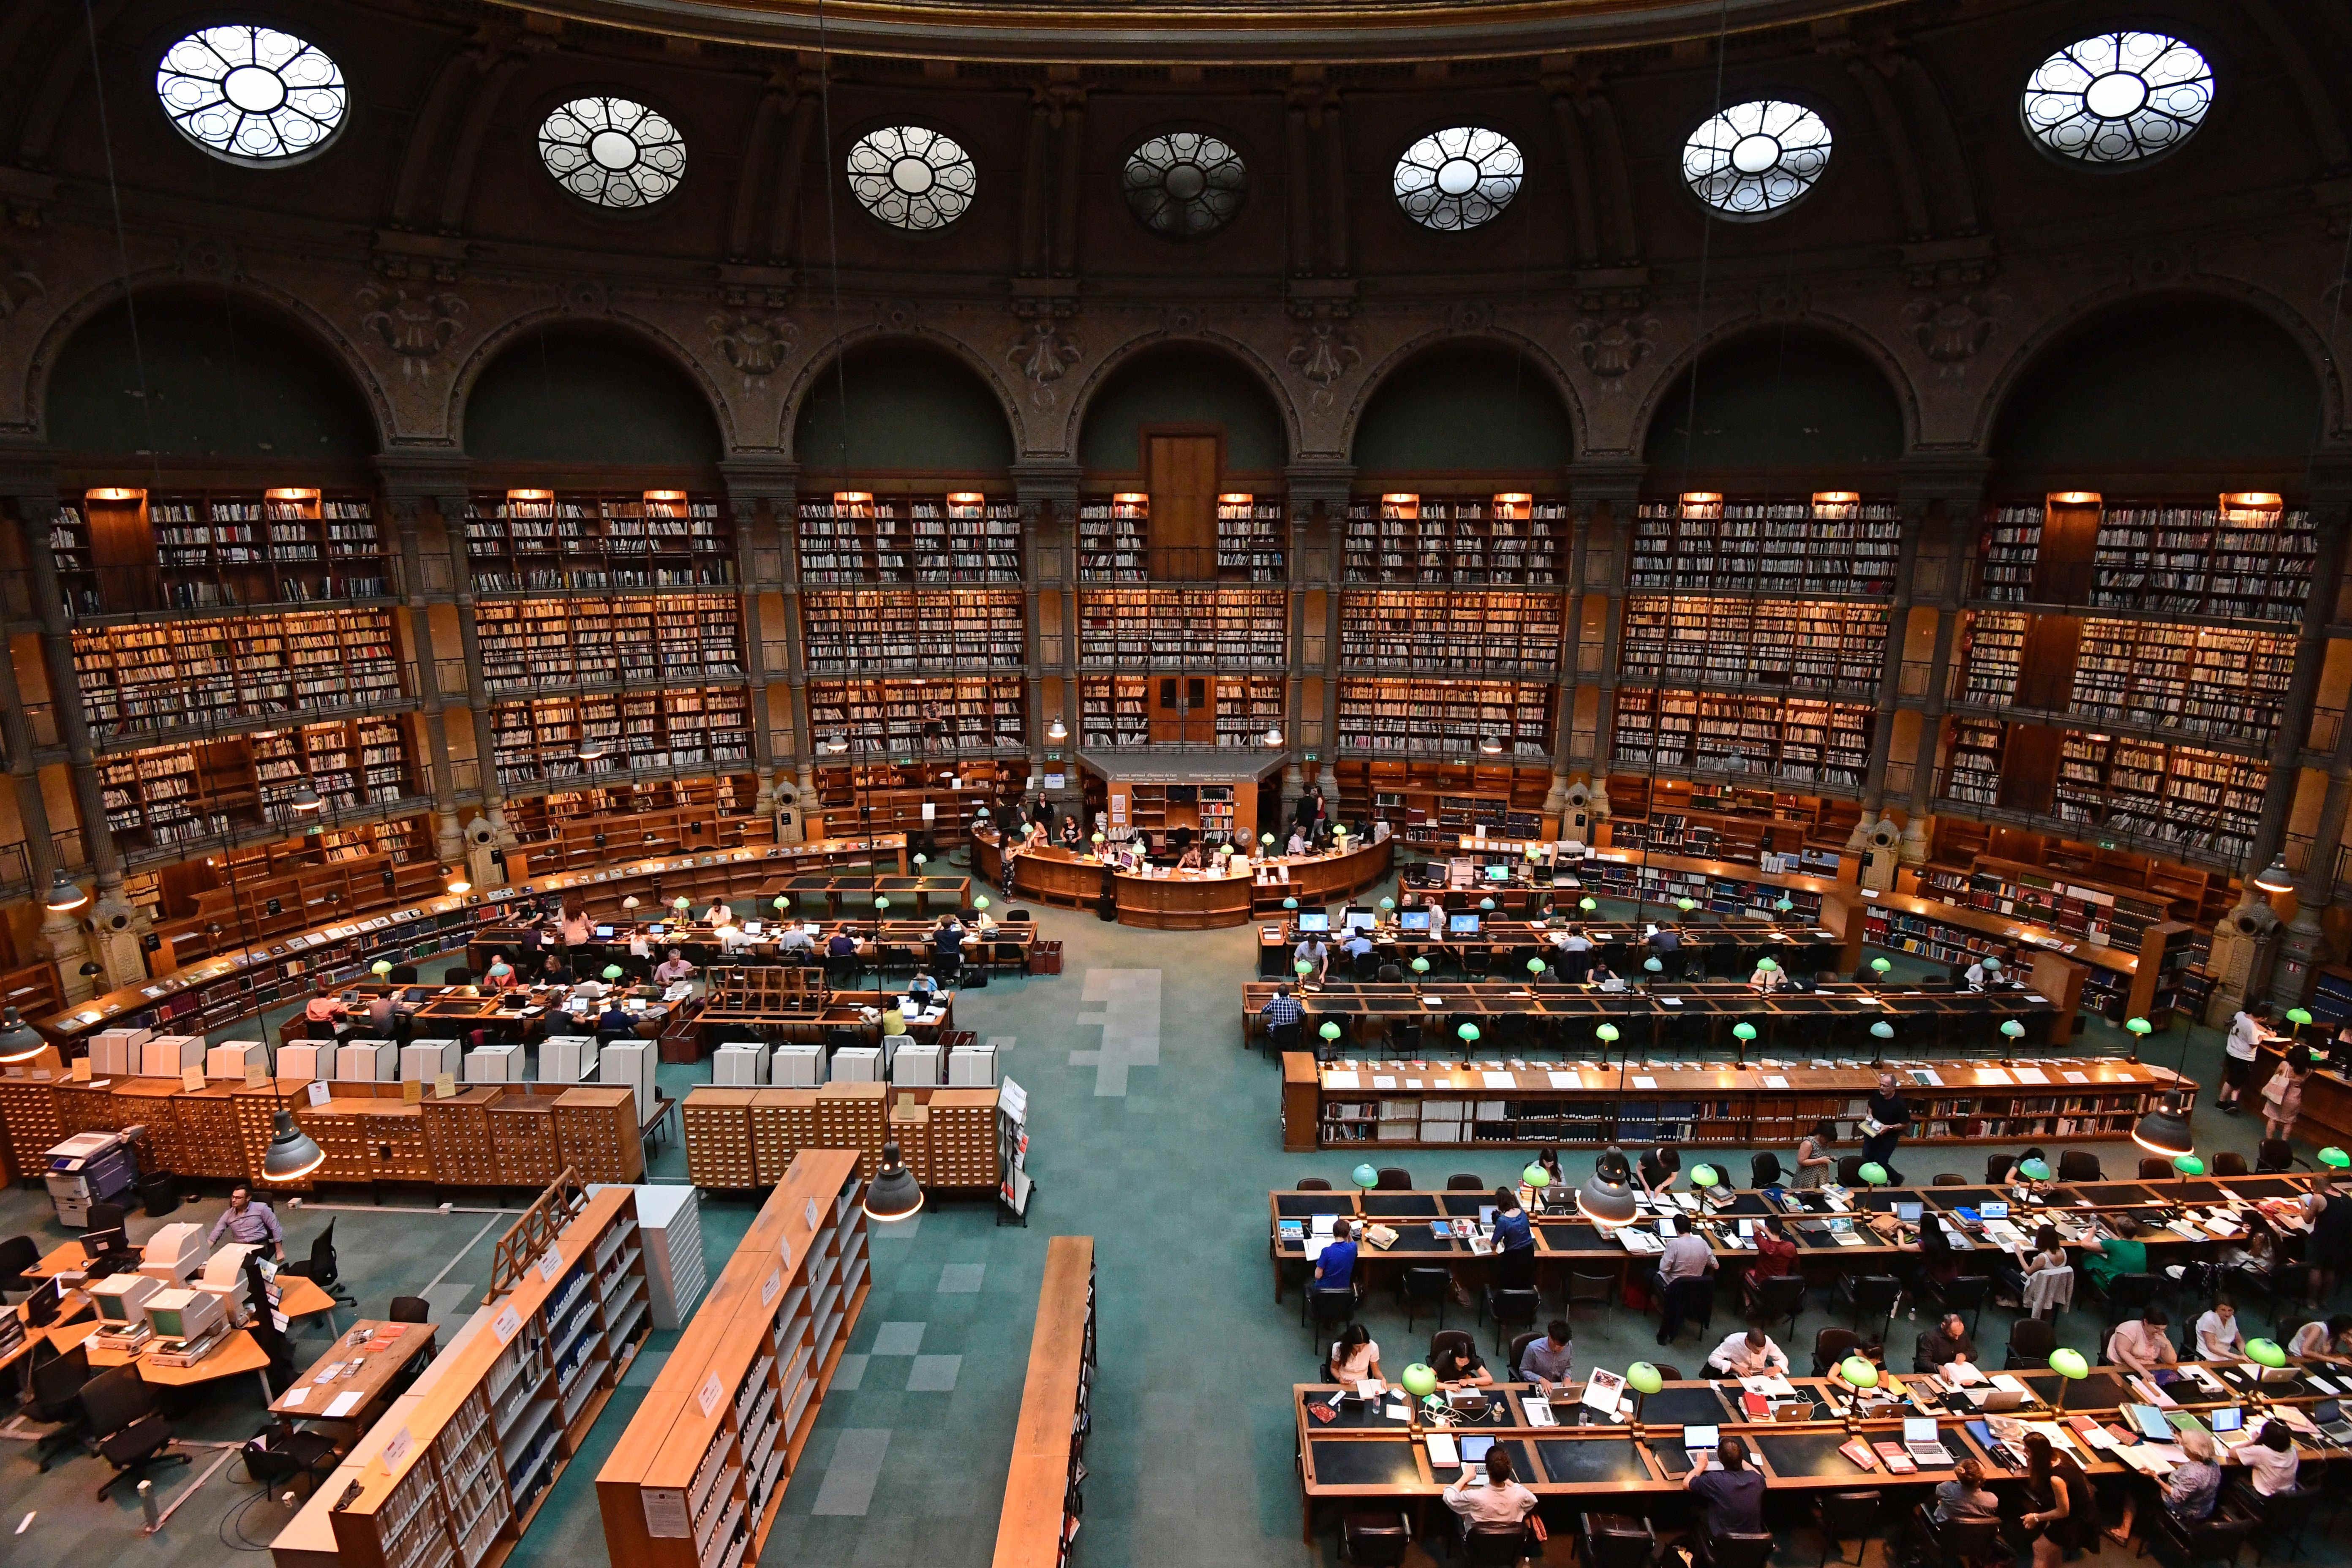 25+ Most Beautiful Libraries – Best Libraries in the World